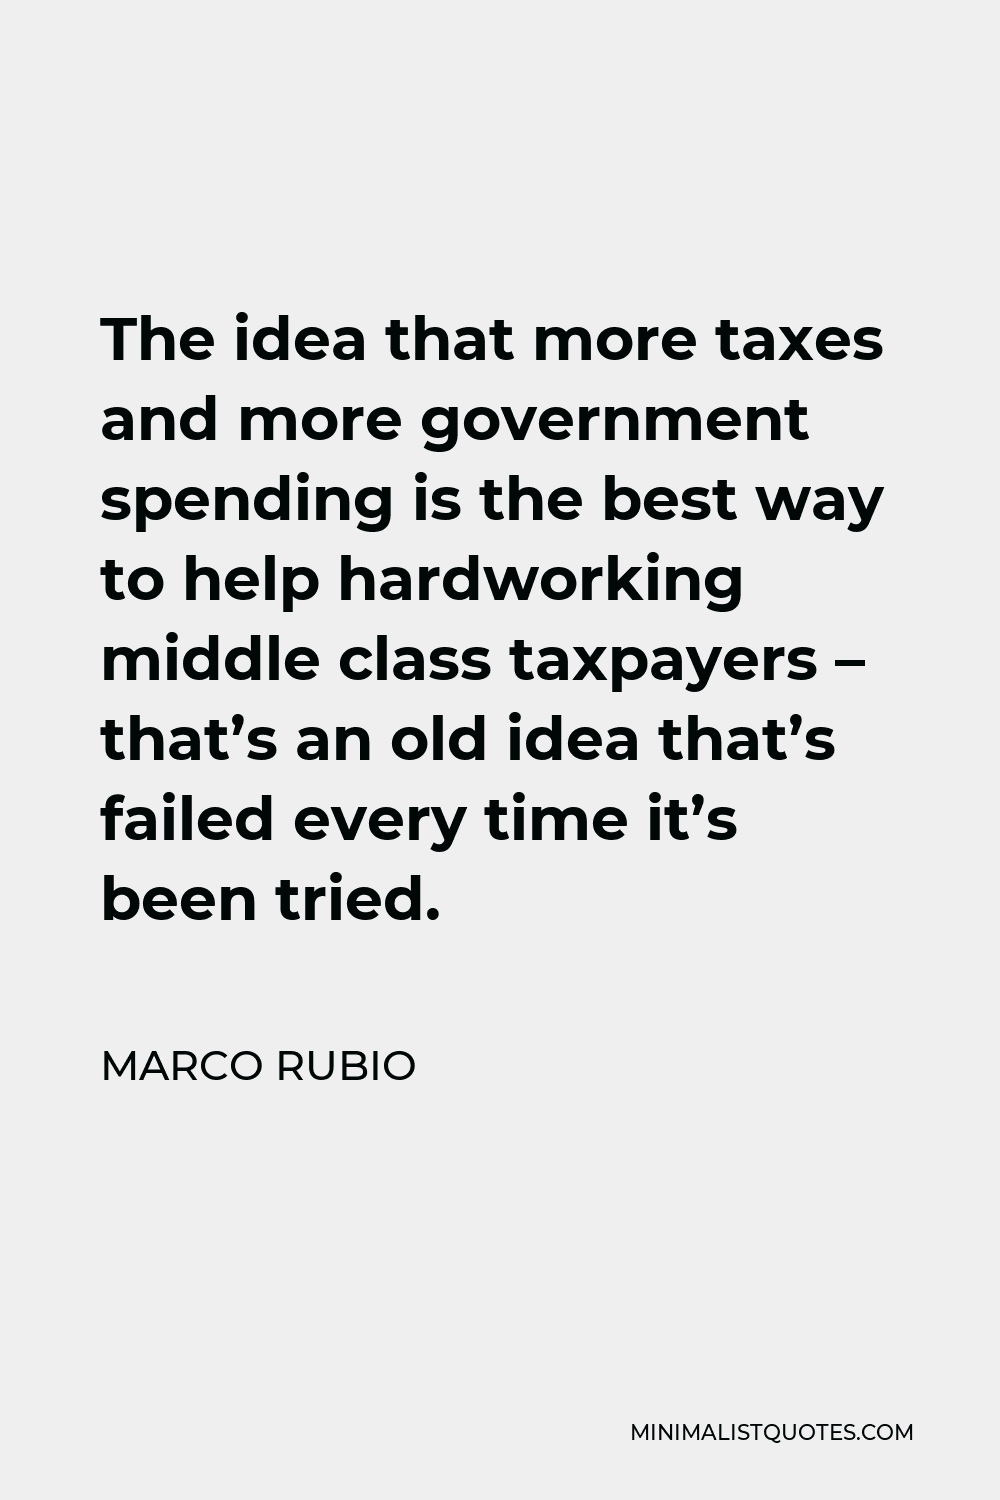 Marco Rubio Quote - The idea that more taxes and more government spending is the best way to help hardworking middle class taxpayers – that’s an old idea that’s failed every time it’s been tried.